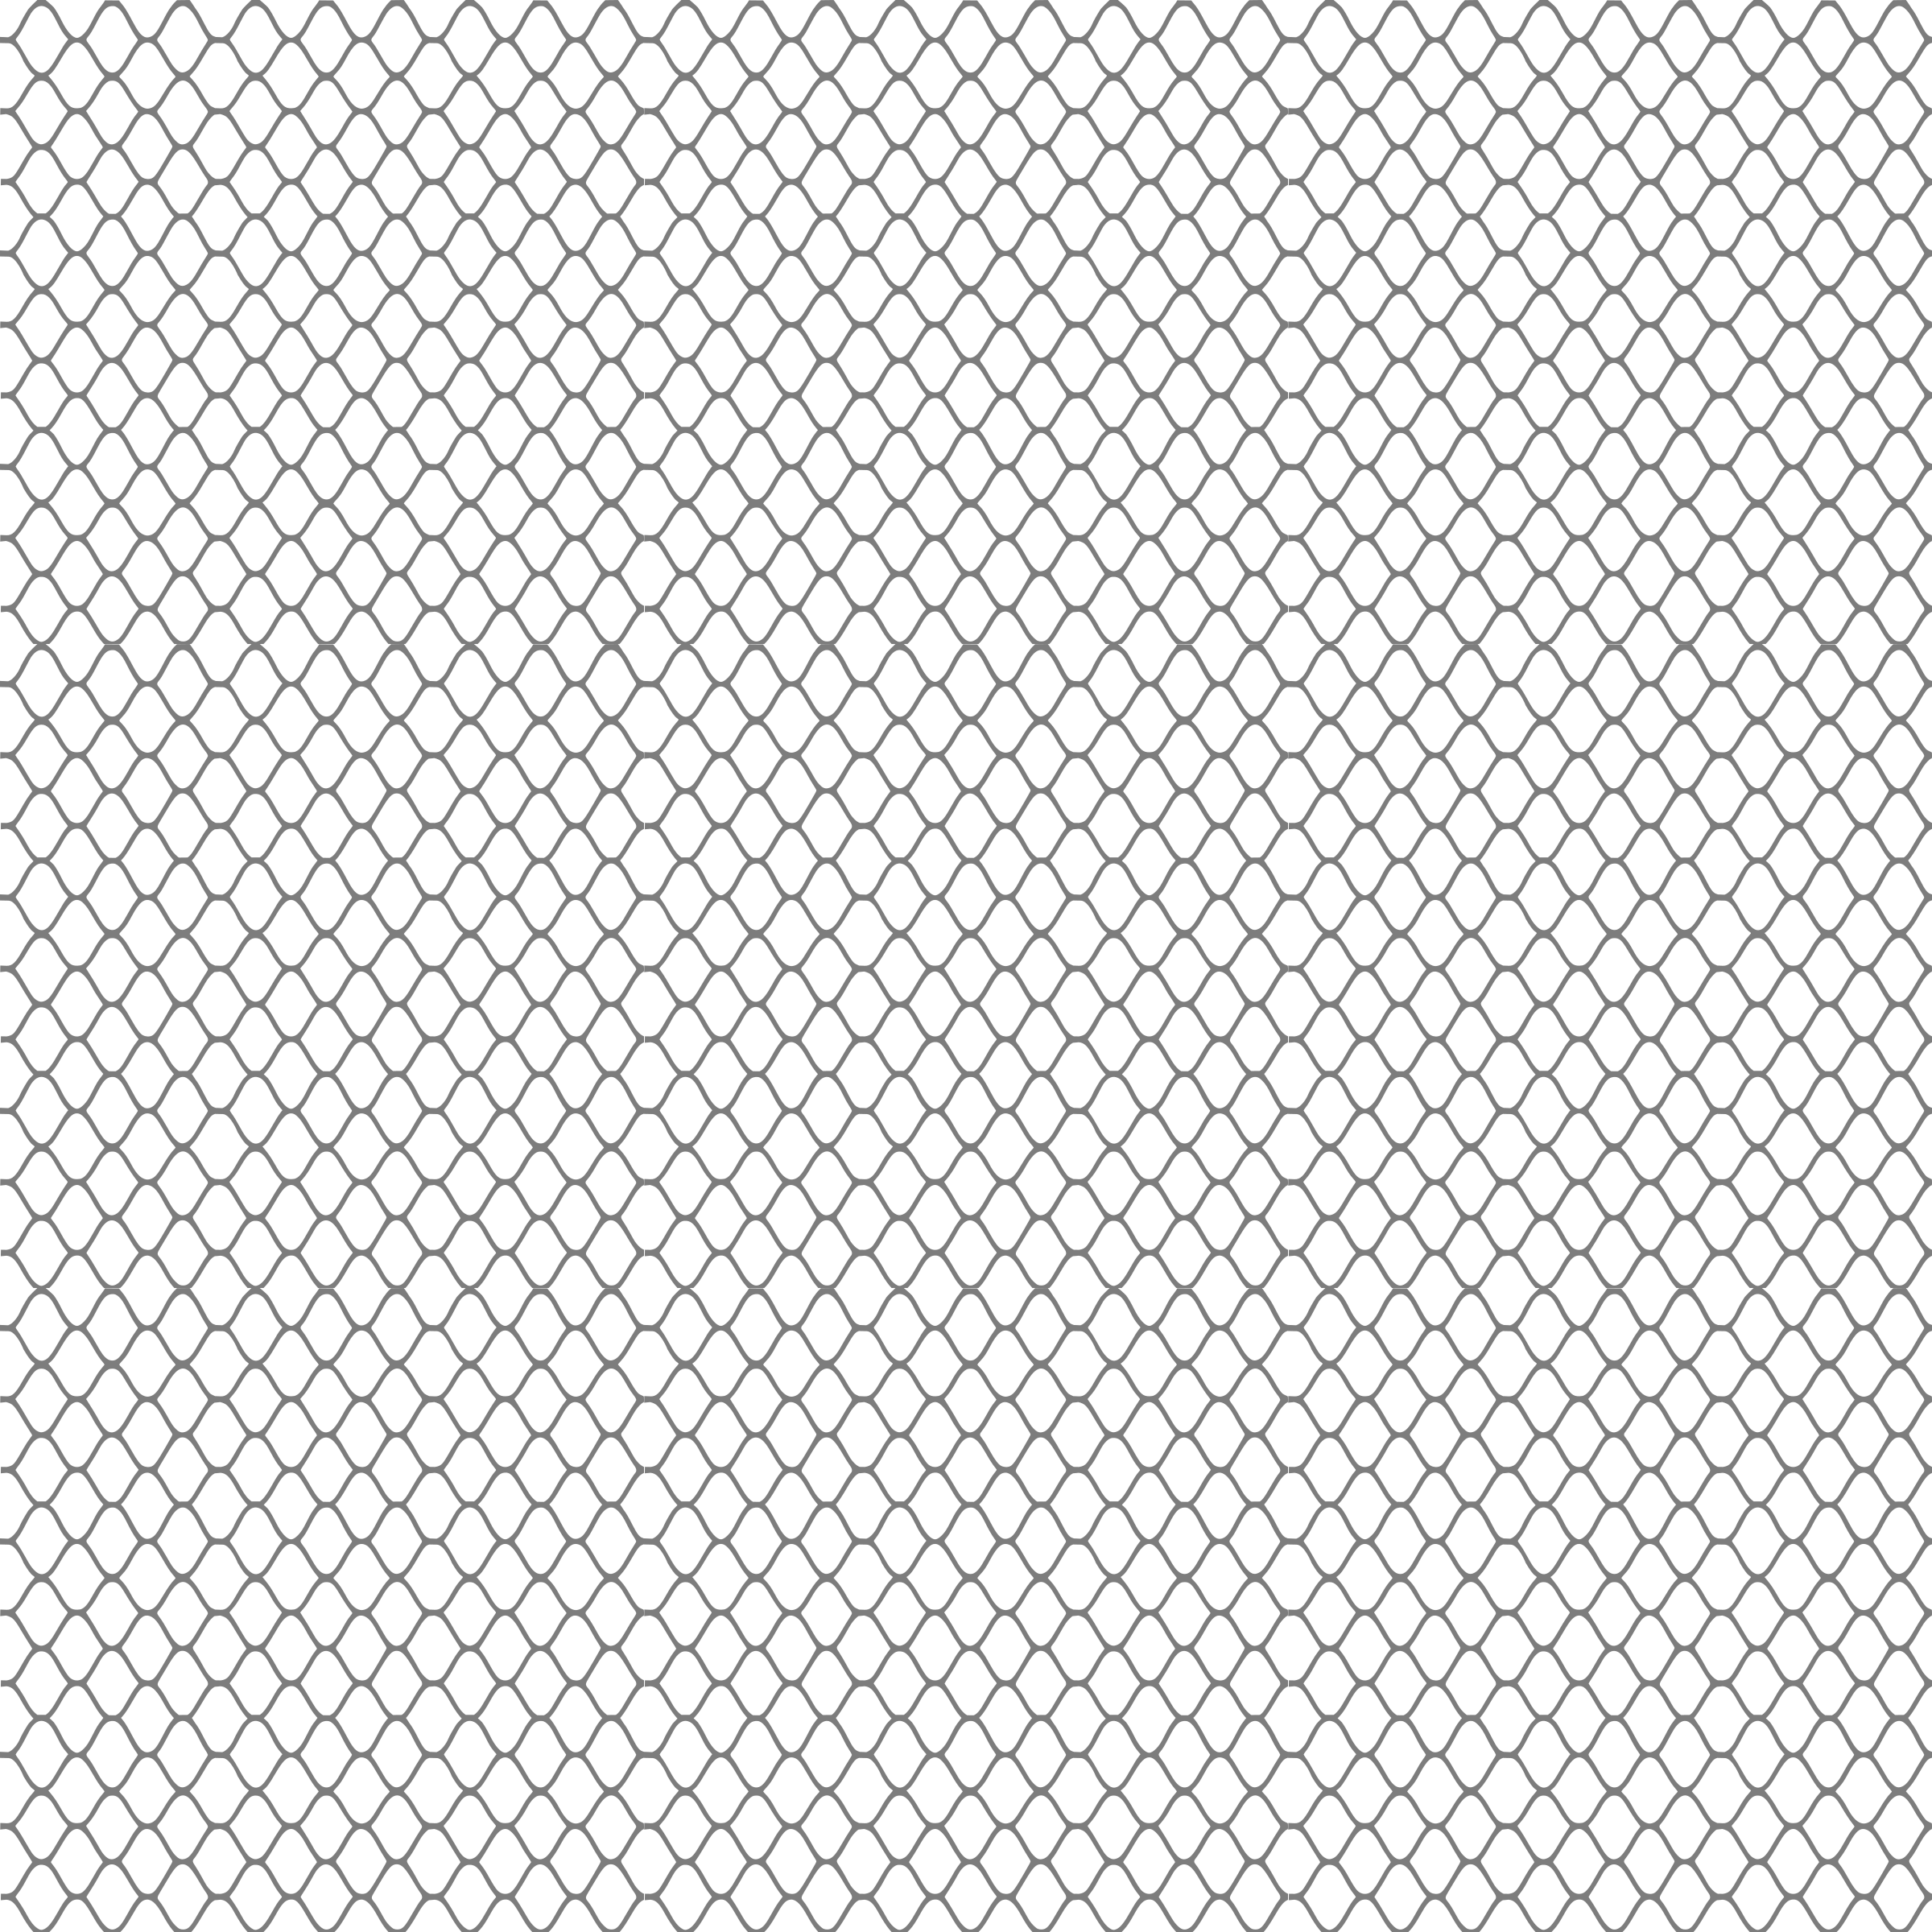 Download Clipart - fishnet seamless pattern